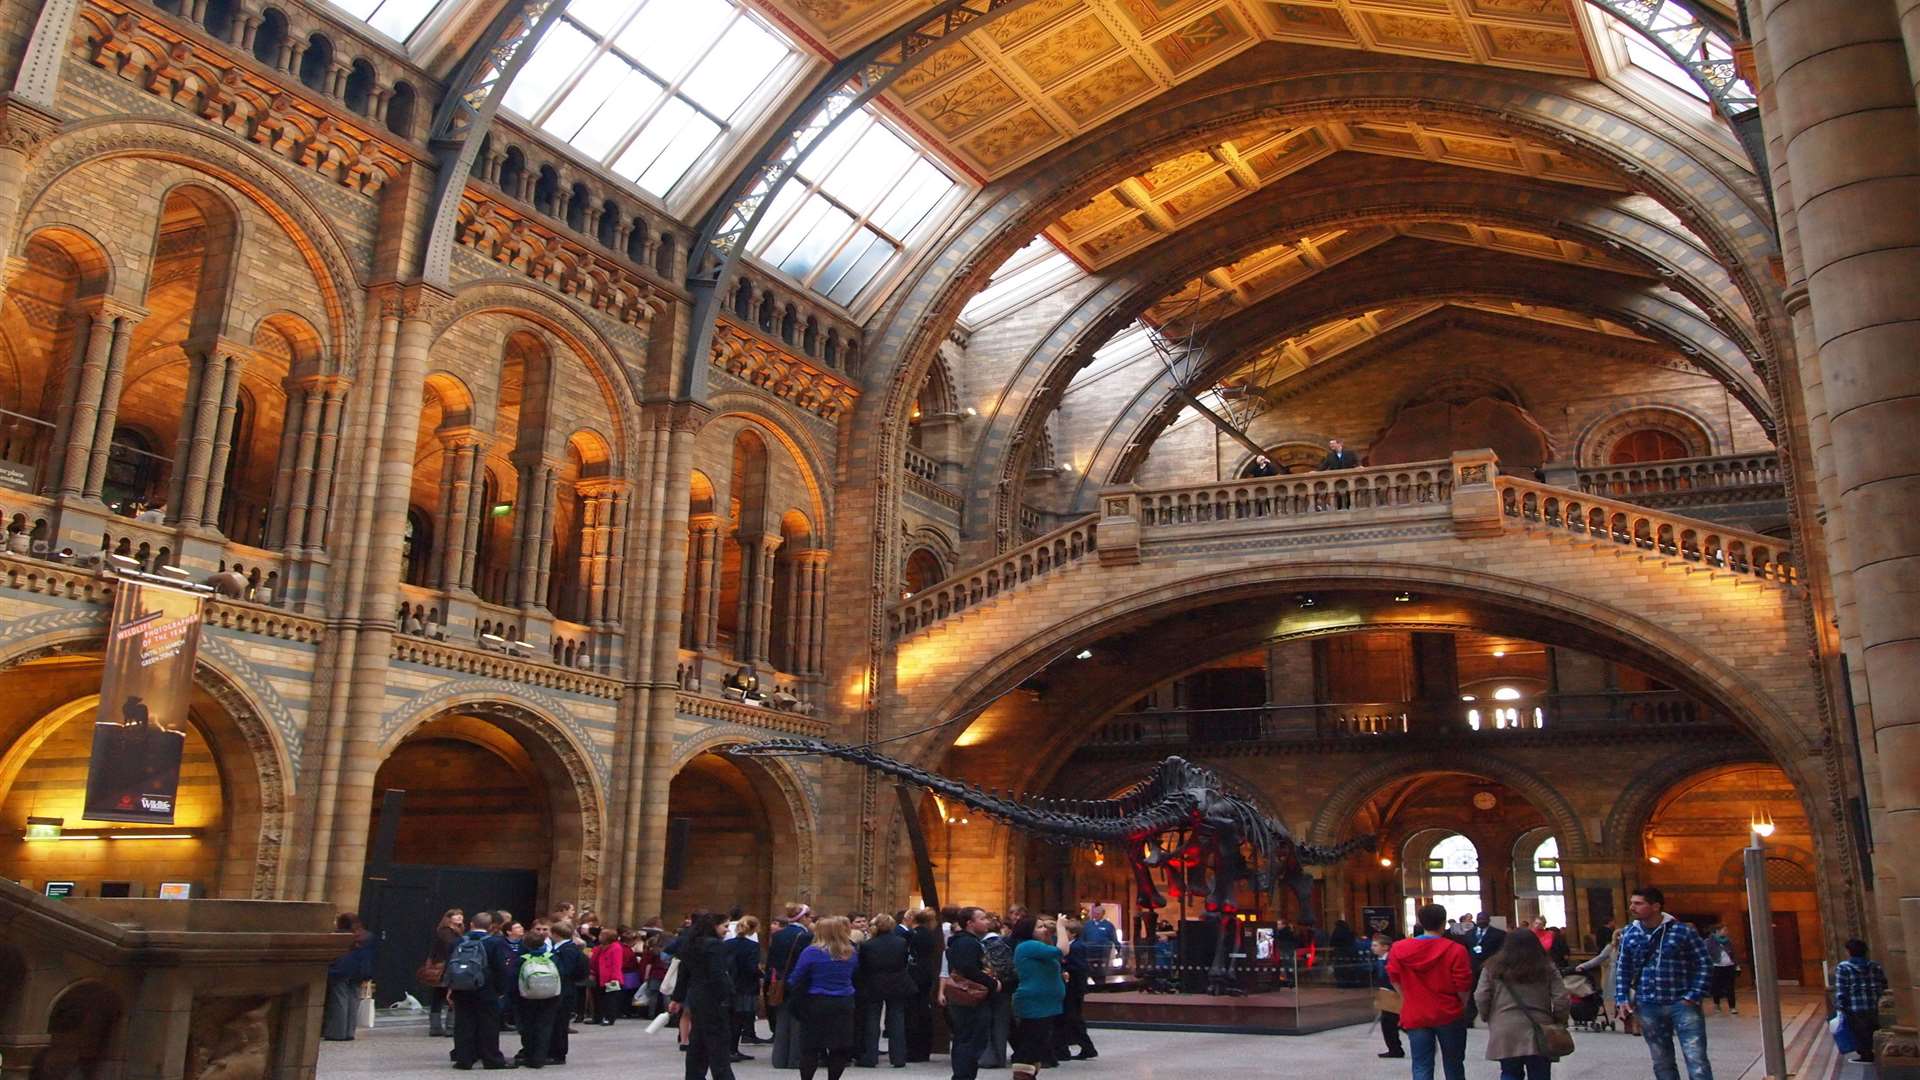 The Natural History Museum is one of three major museums on Exhibition Road in South Kensington, the others being the Science Museum and the V&A